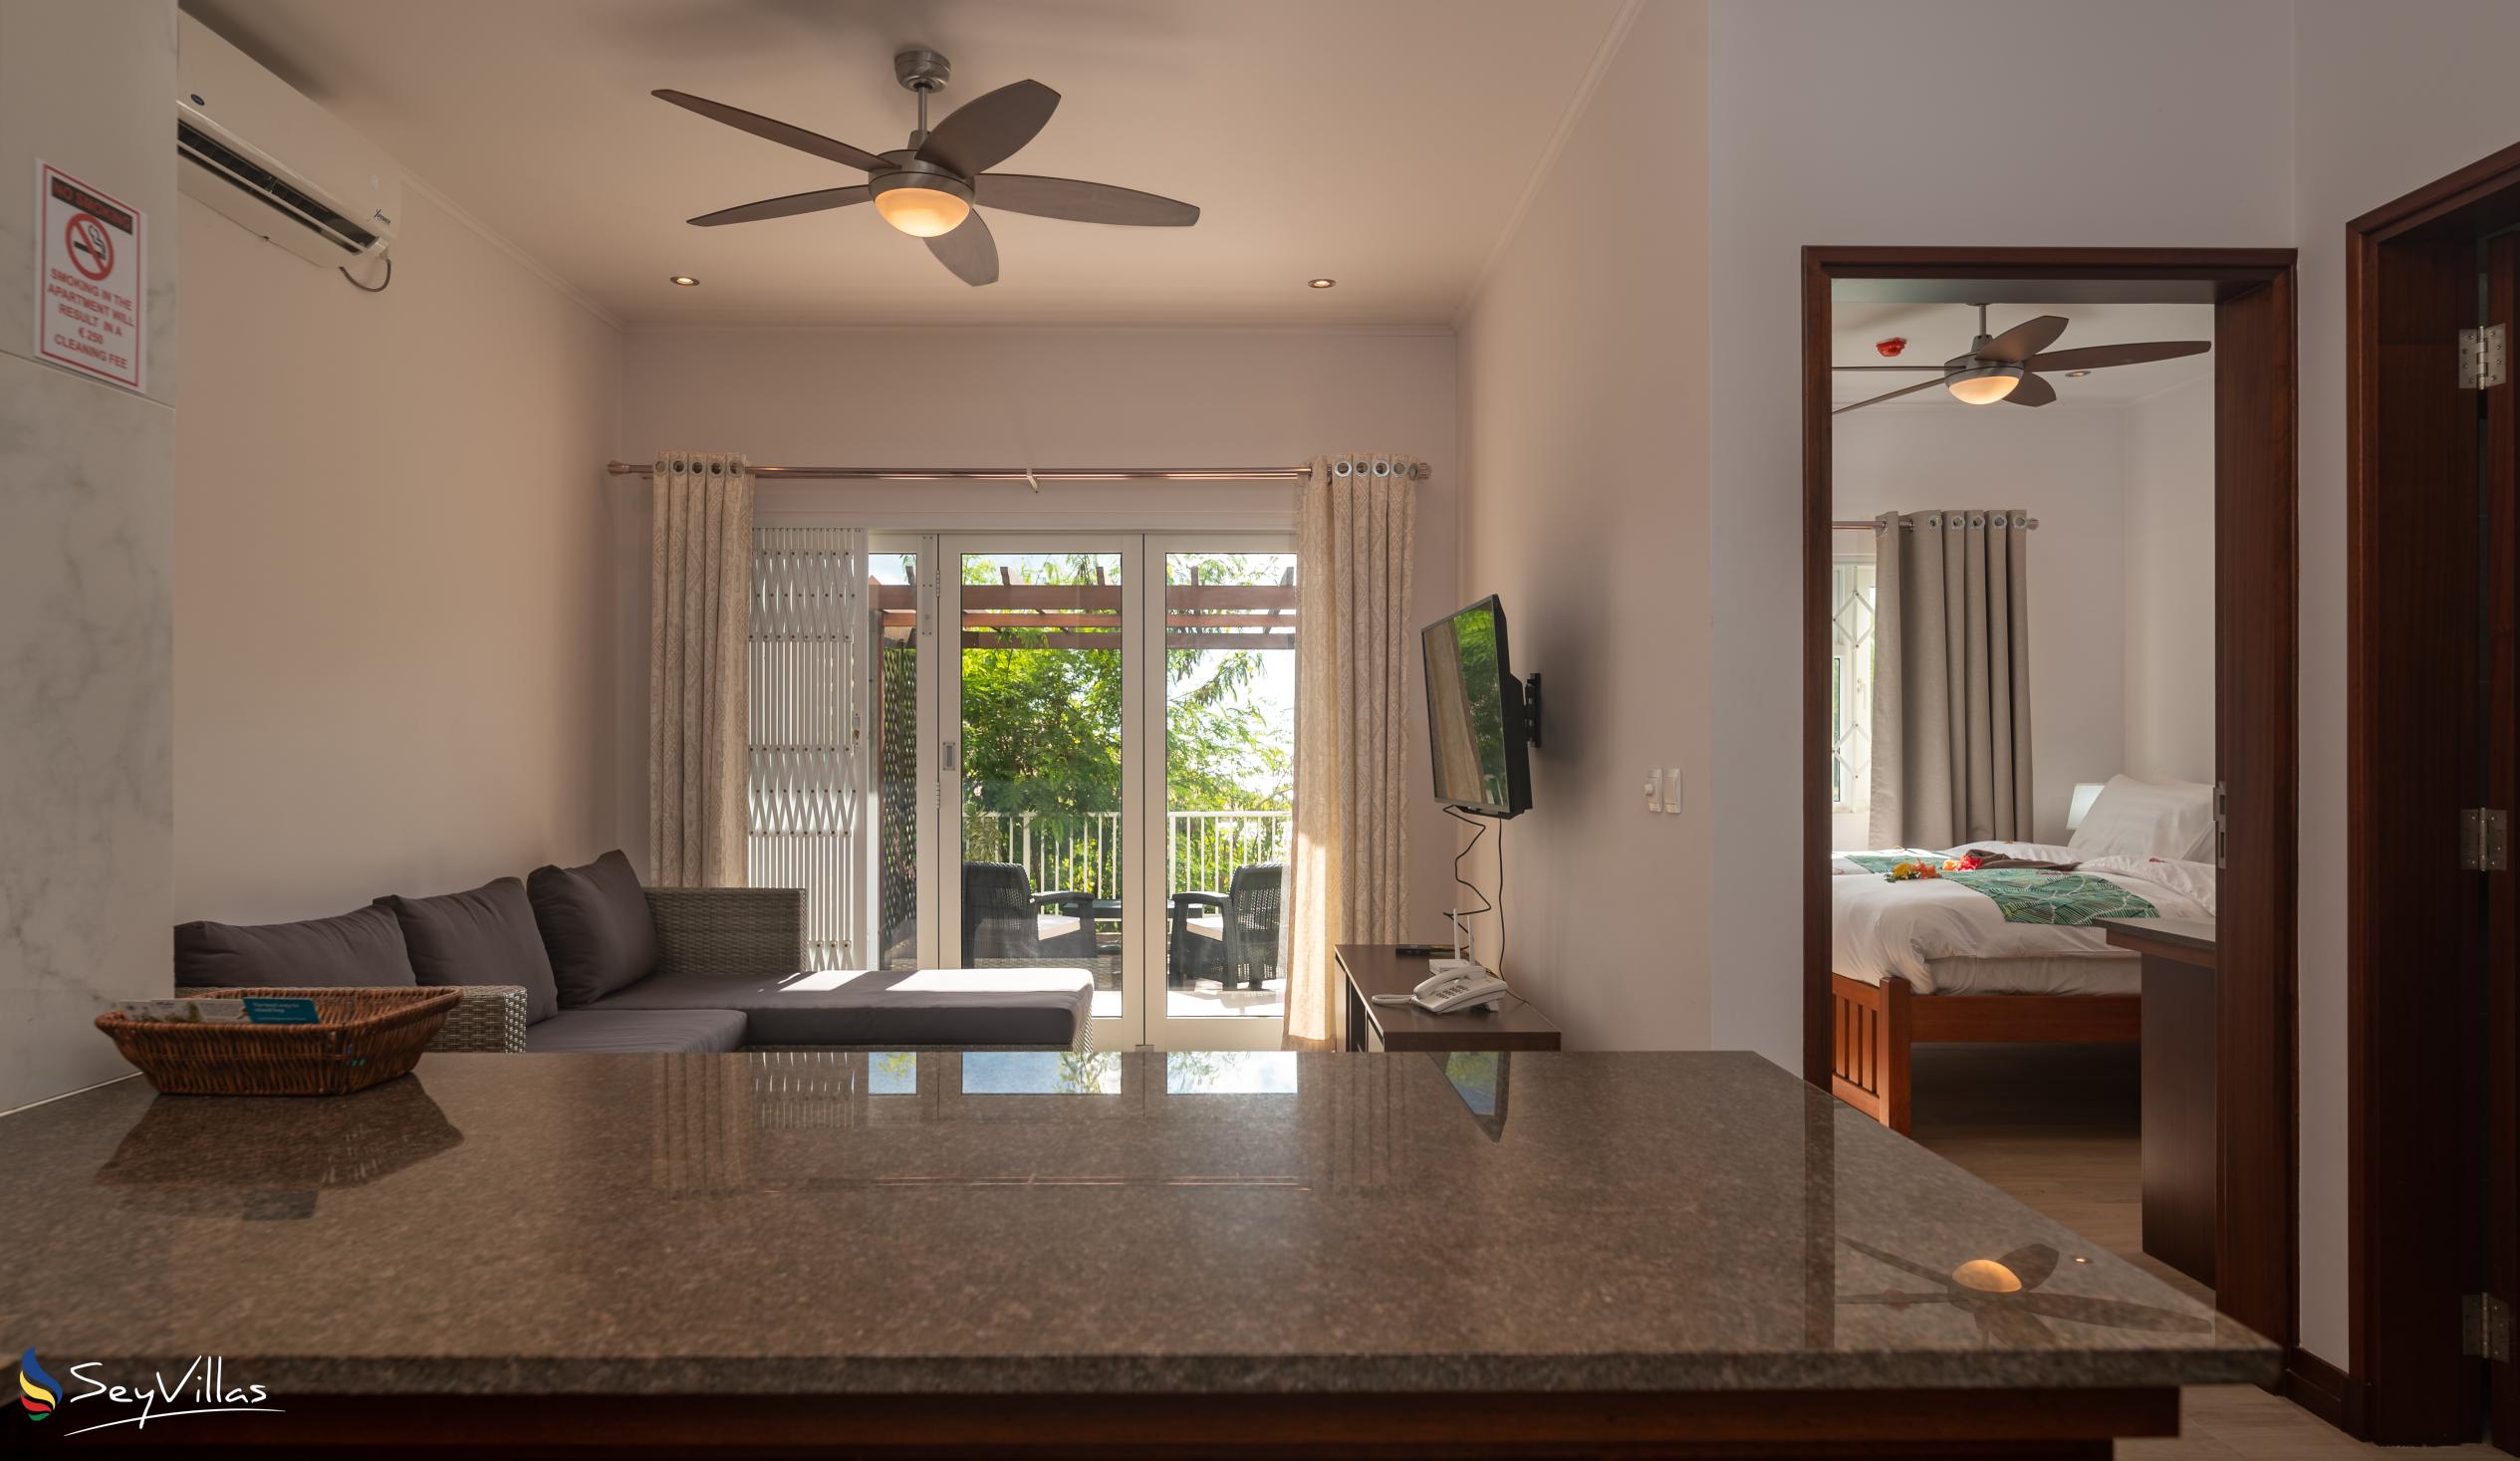 Photo 61: Crystal Shores Self Catering Apartments - Garden View Apartment - Mahé (Seychelles)